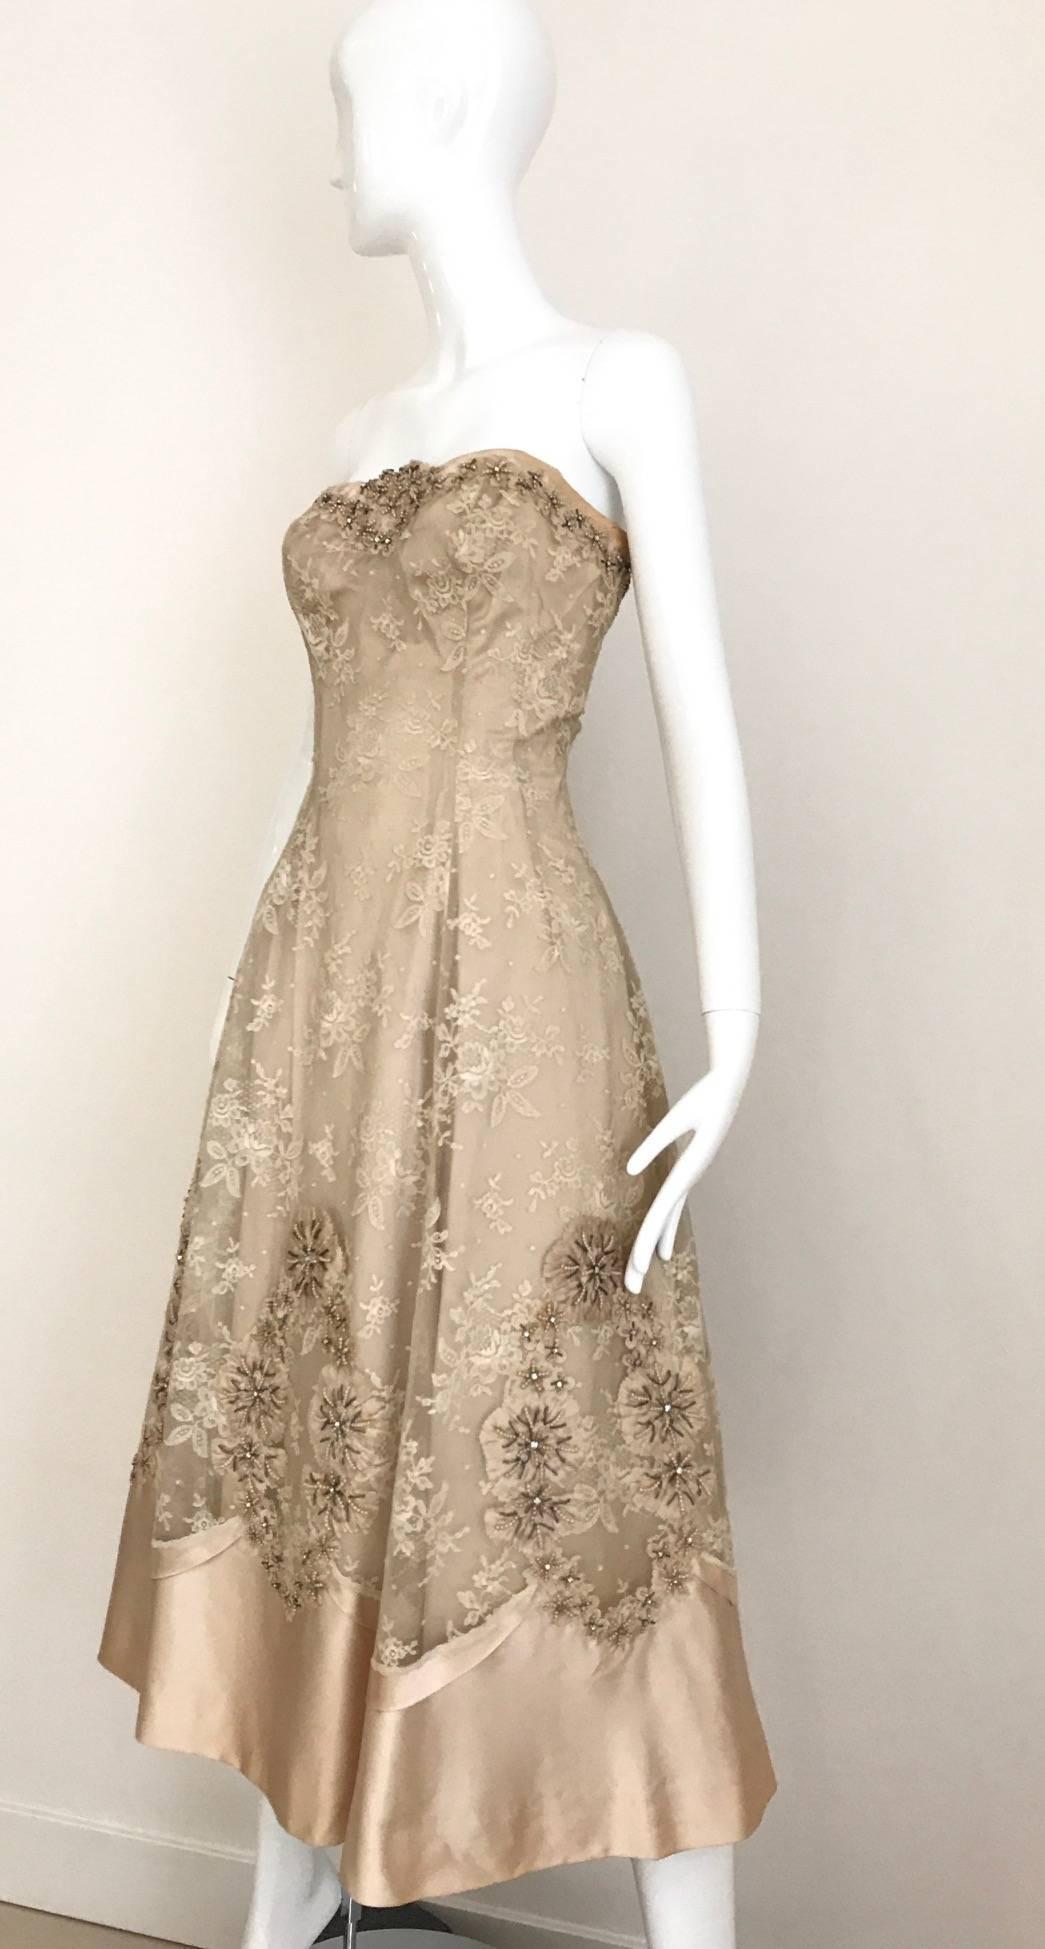 Beautiful Demi - Couture Vintage 1950s Lace and Satin Taupe Embroidered Strapless  Cocktail Dress. The attention to detail on this dress is impeccable. Dress is made of satin and silk lace overlay with embroidered silk flower appliques beads and